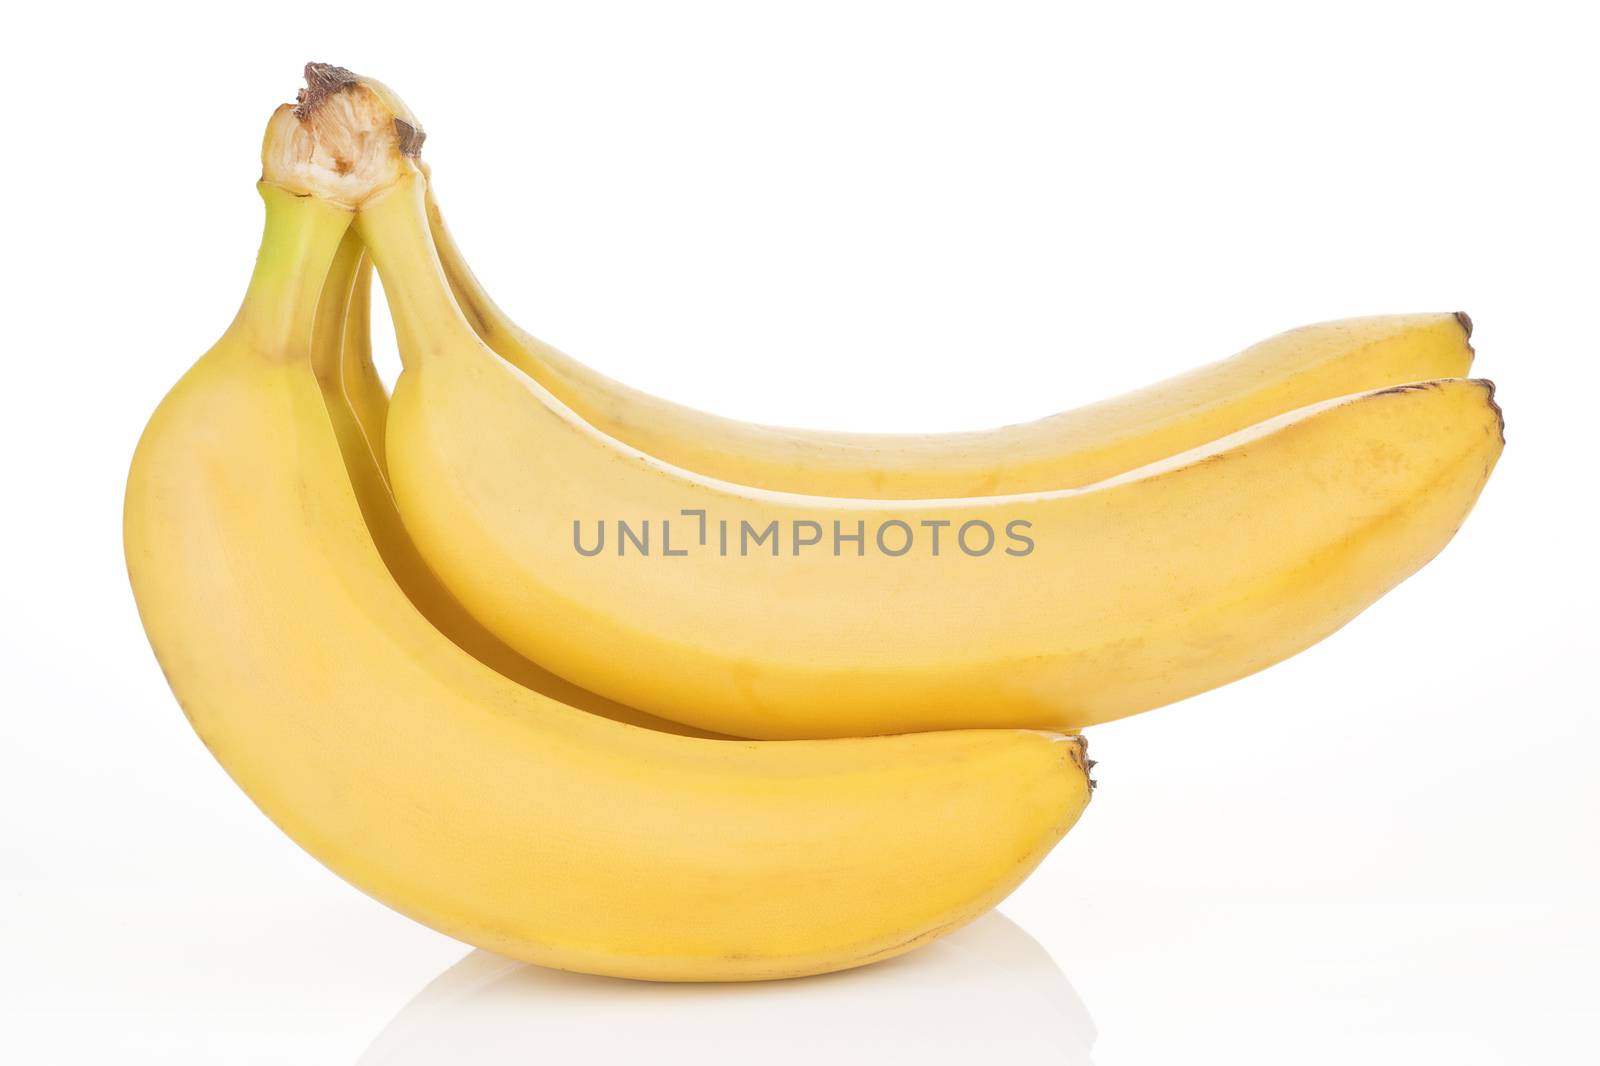 Organic bananas isolated on white background. Healthy fruit concept.